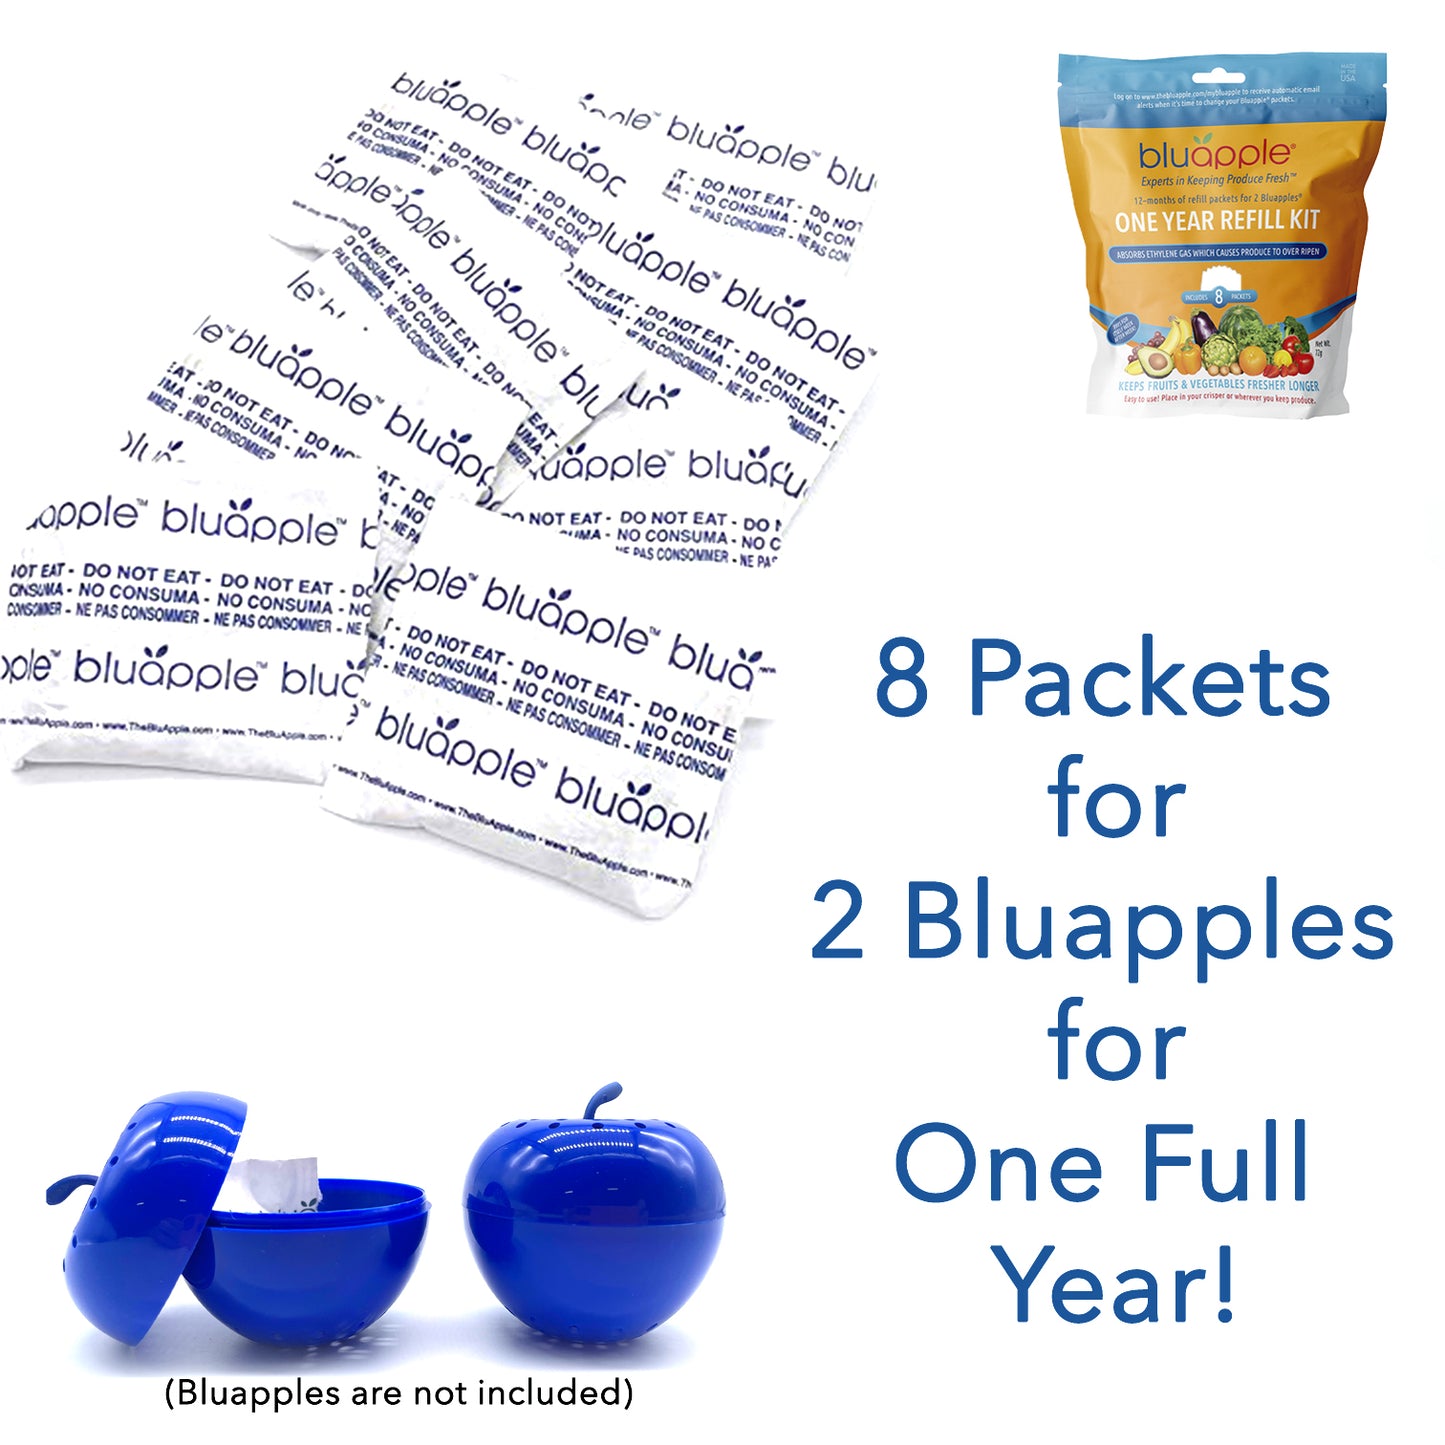 Bluapple® One Year Refill Kit